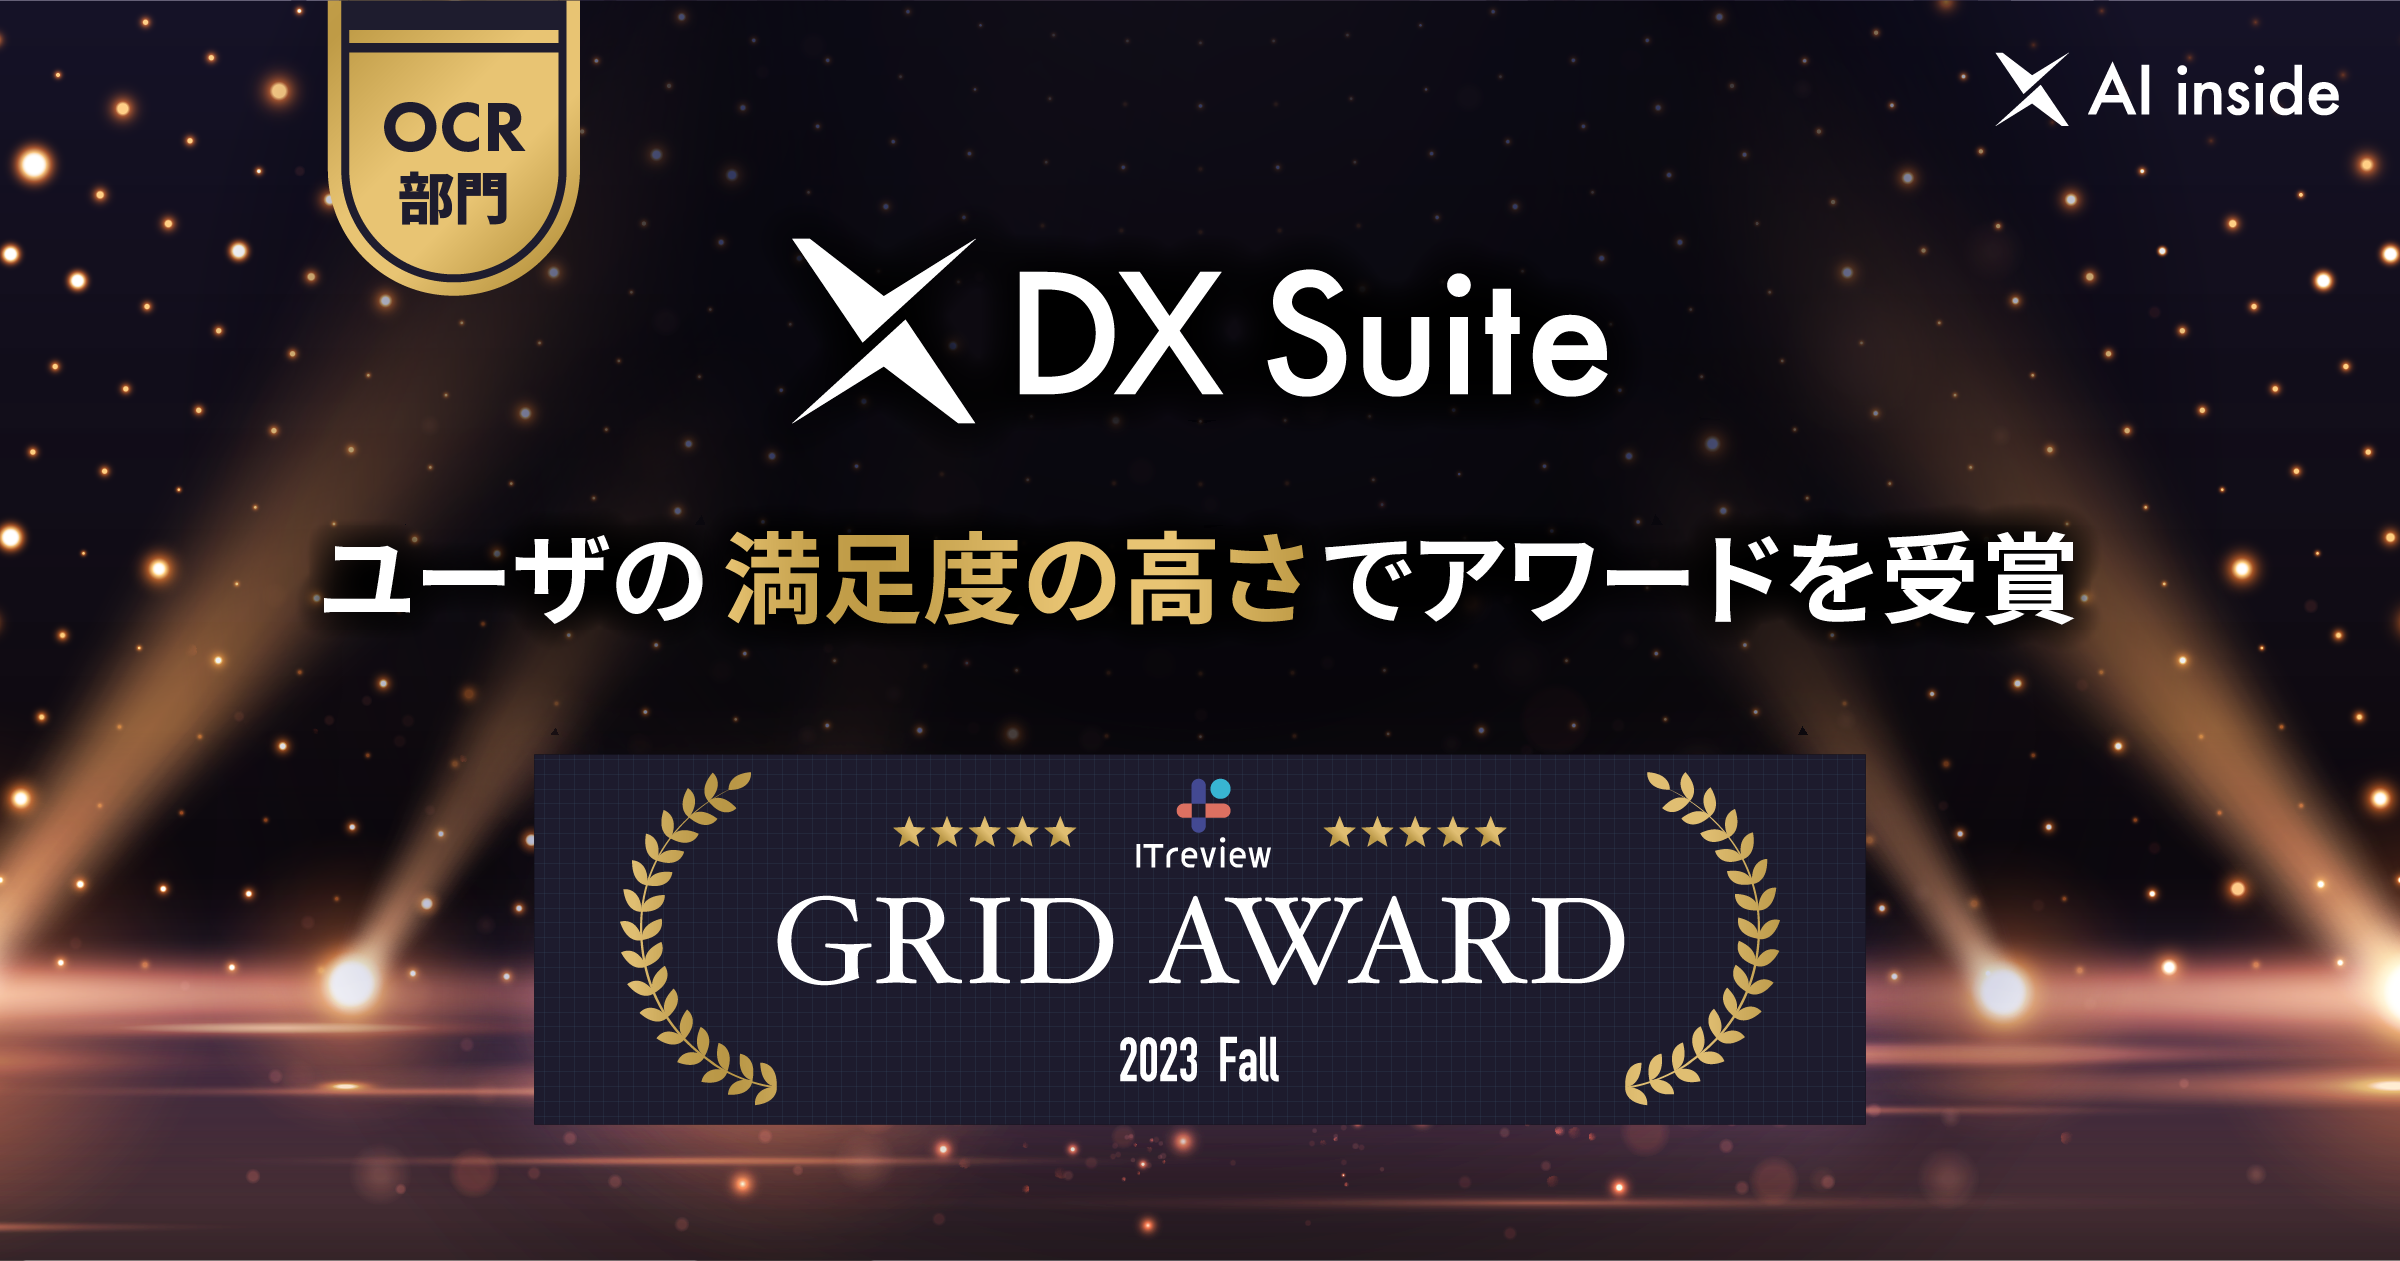 ITreview Grid Award 2023 Fall にて、ユーザーの満足度の高さで「High Performer」を5期連続で受賞